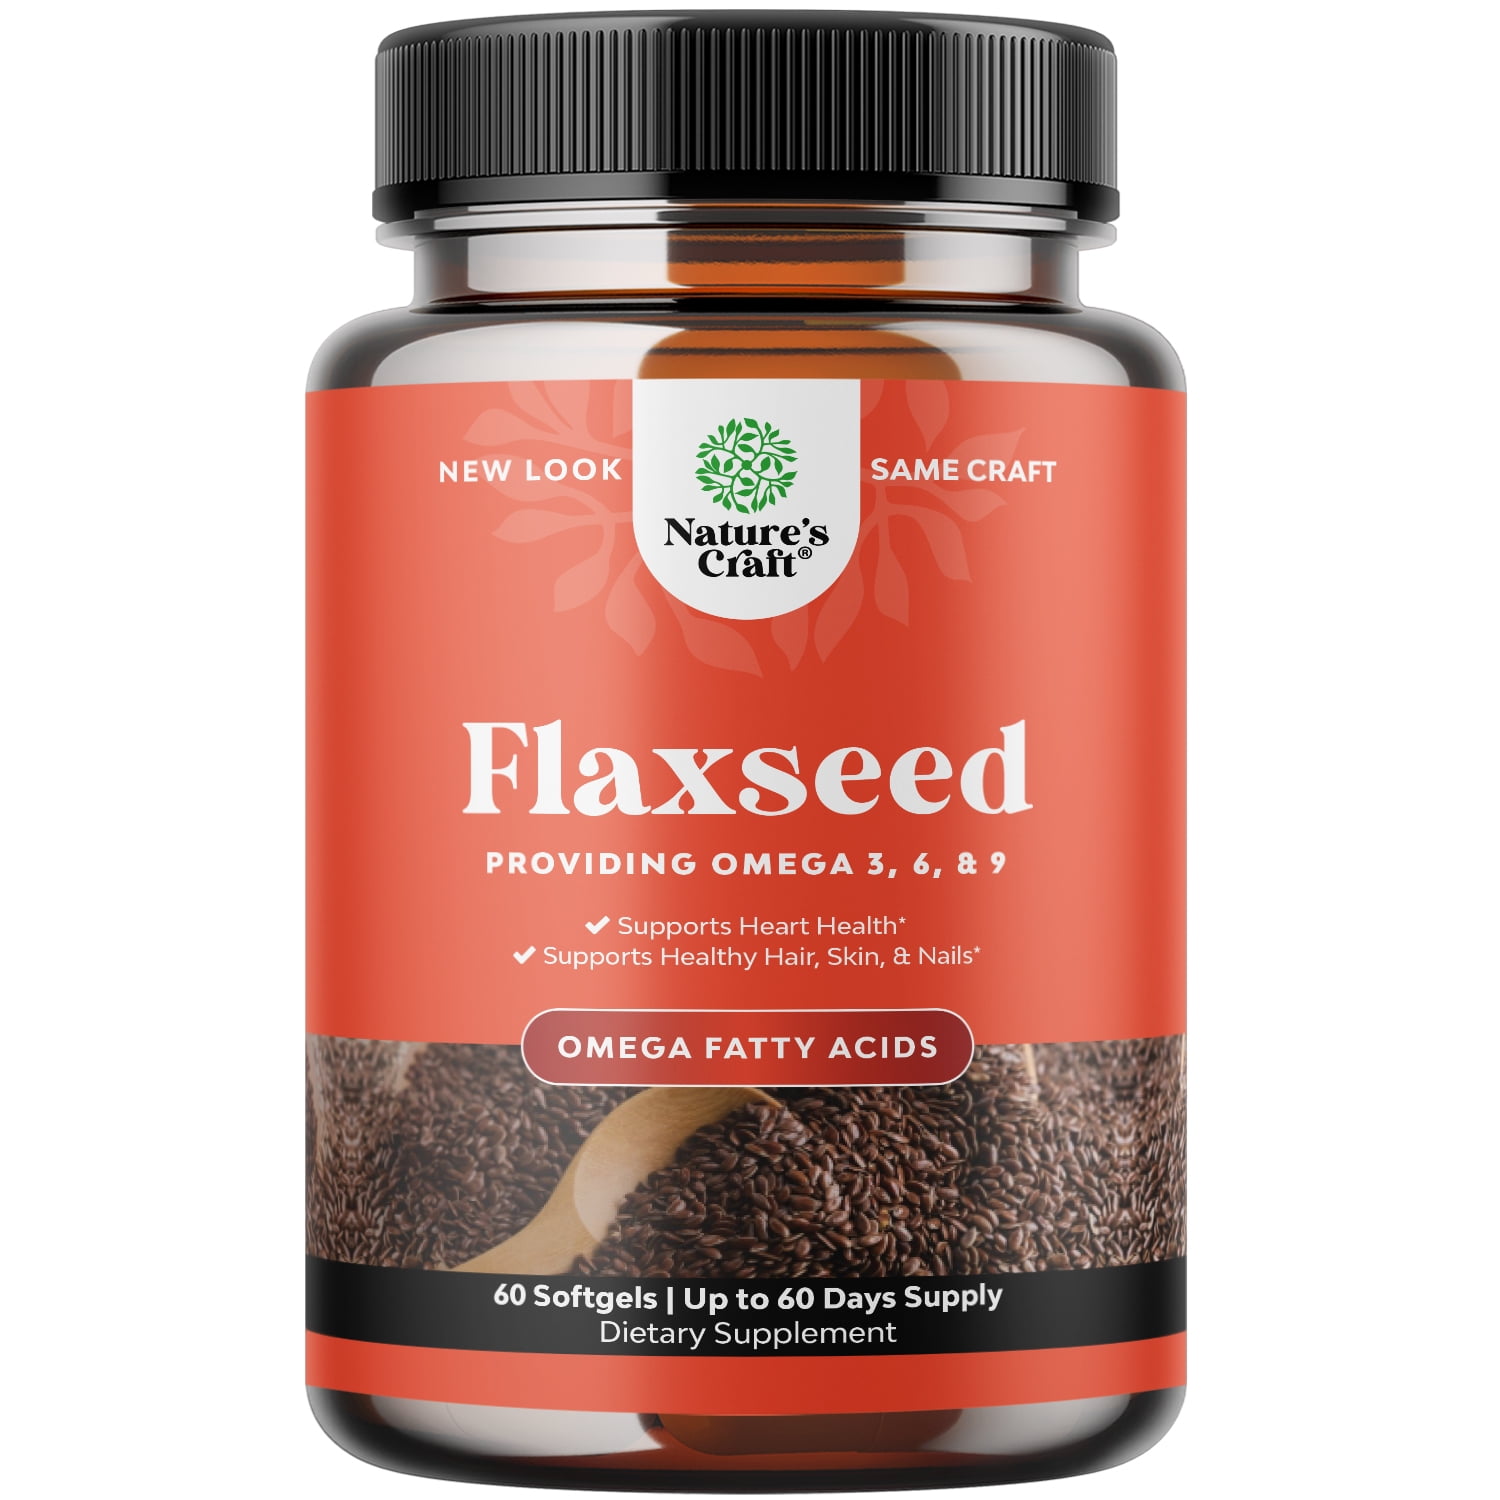 The Anti-Aging Benefits of Flaxseed Oil for Your Heart, Skin, and Brain